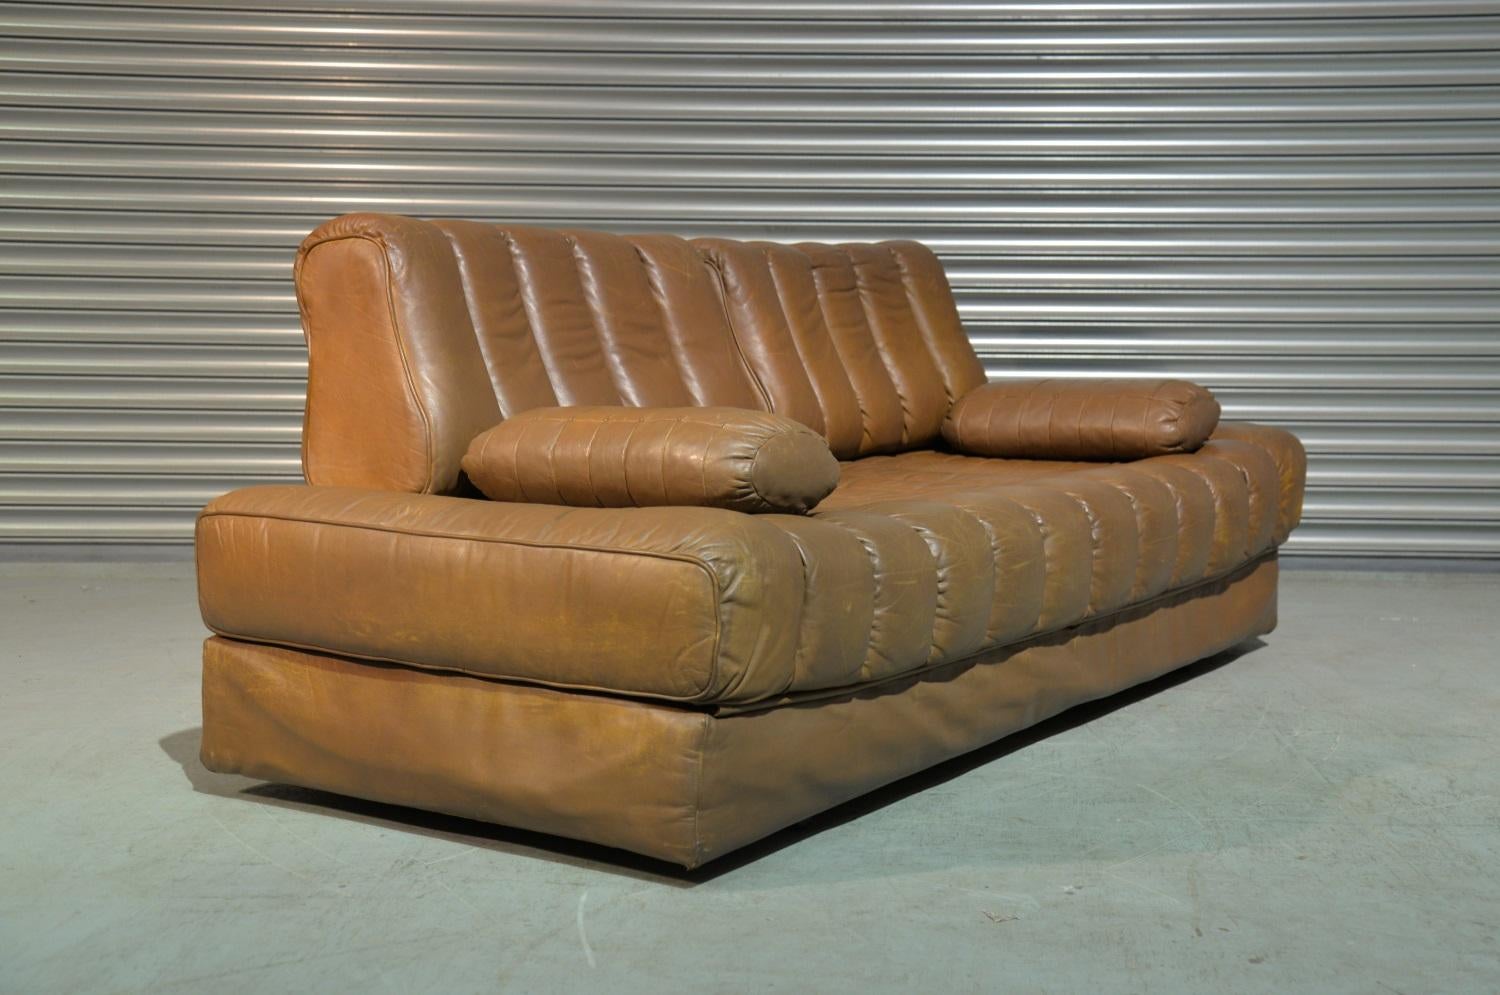 Vintage De Sede DS 85 Leather Sofa, Daybed and Loveseat, Switzerland, 1960s For Sale 3